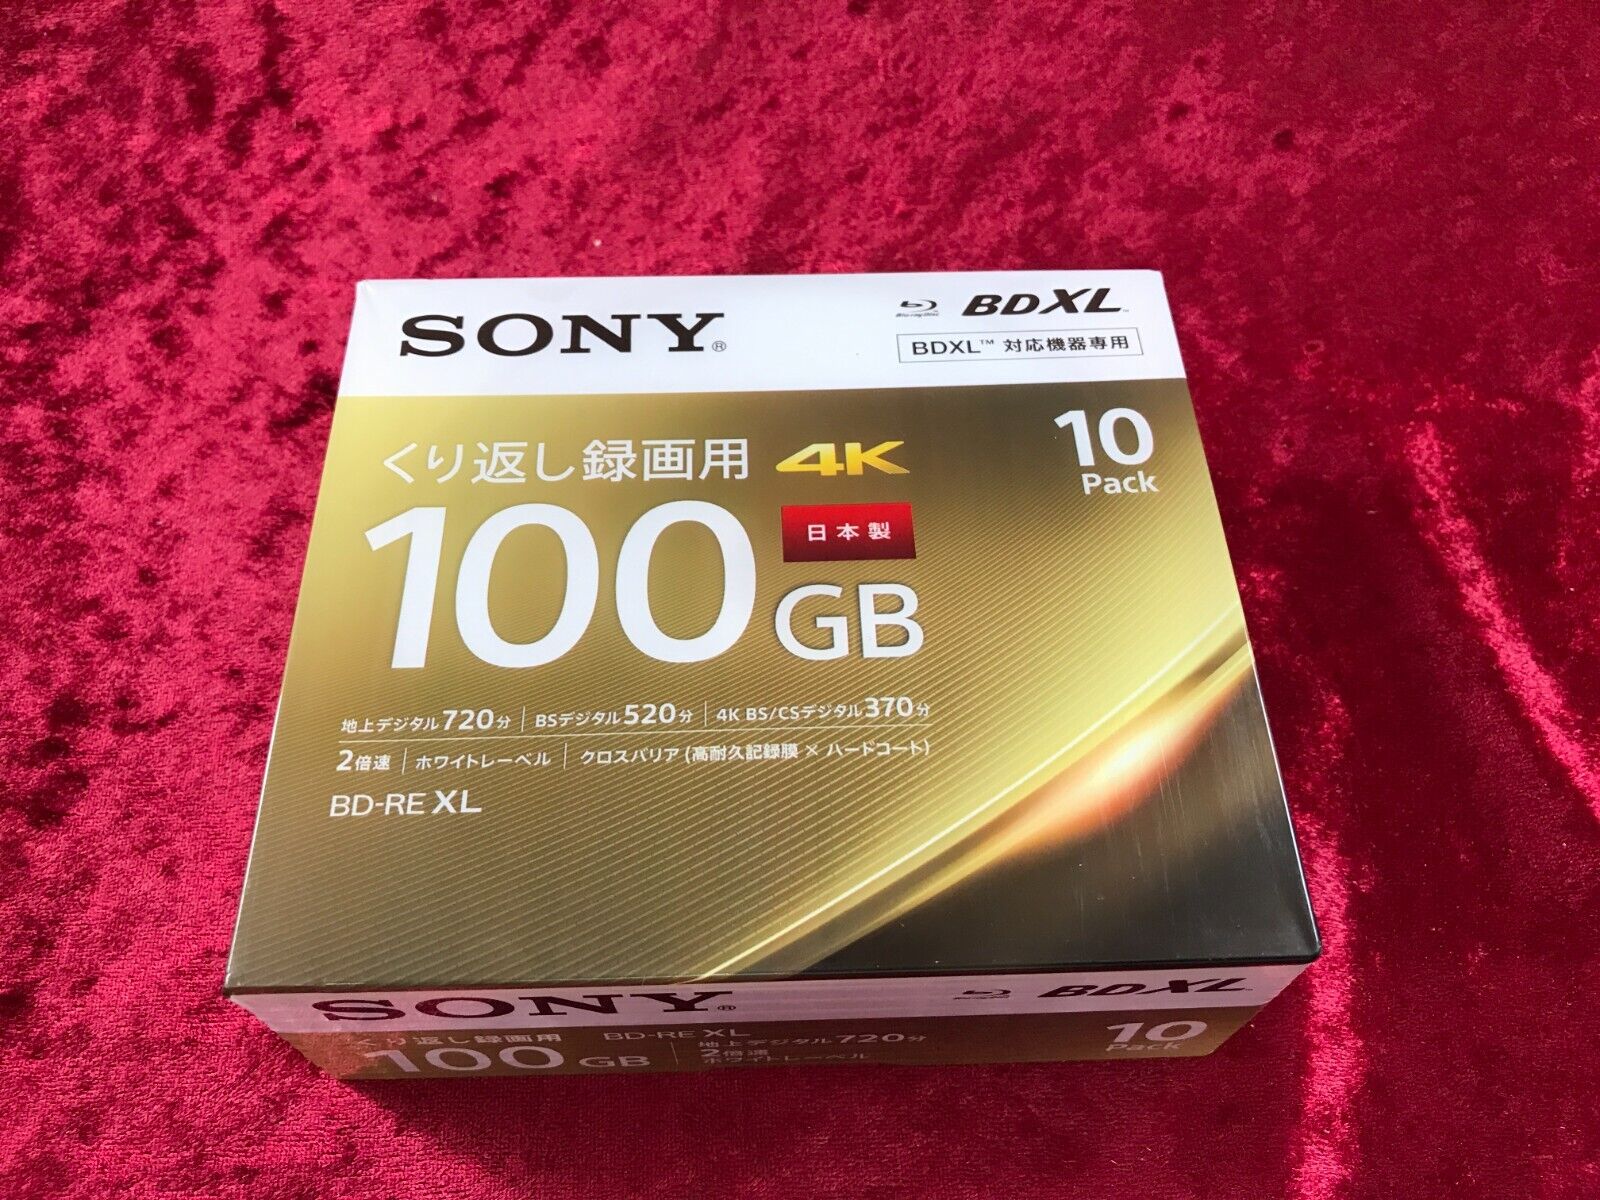 SONY Blu-ray BD-RE XL BDXL 3D Printable Disc 10 Pack 10BNE3VEPS2 JAPAN OFFICIAL